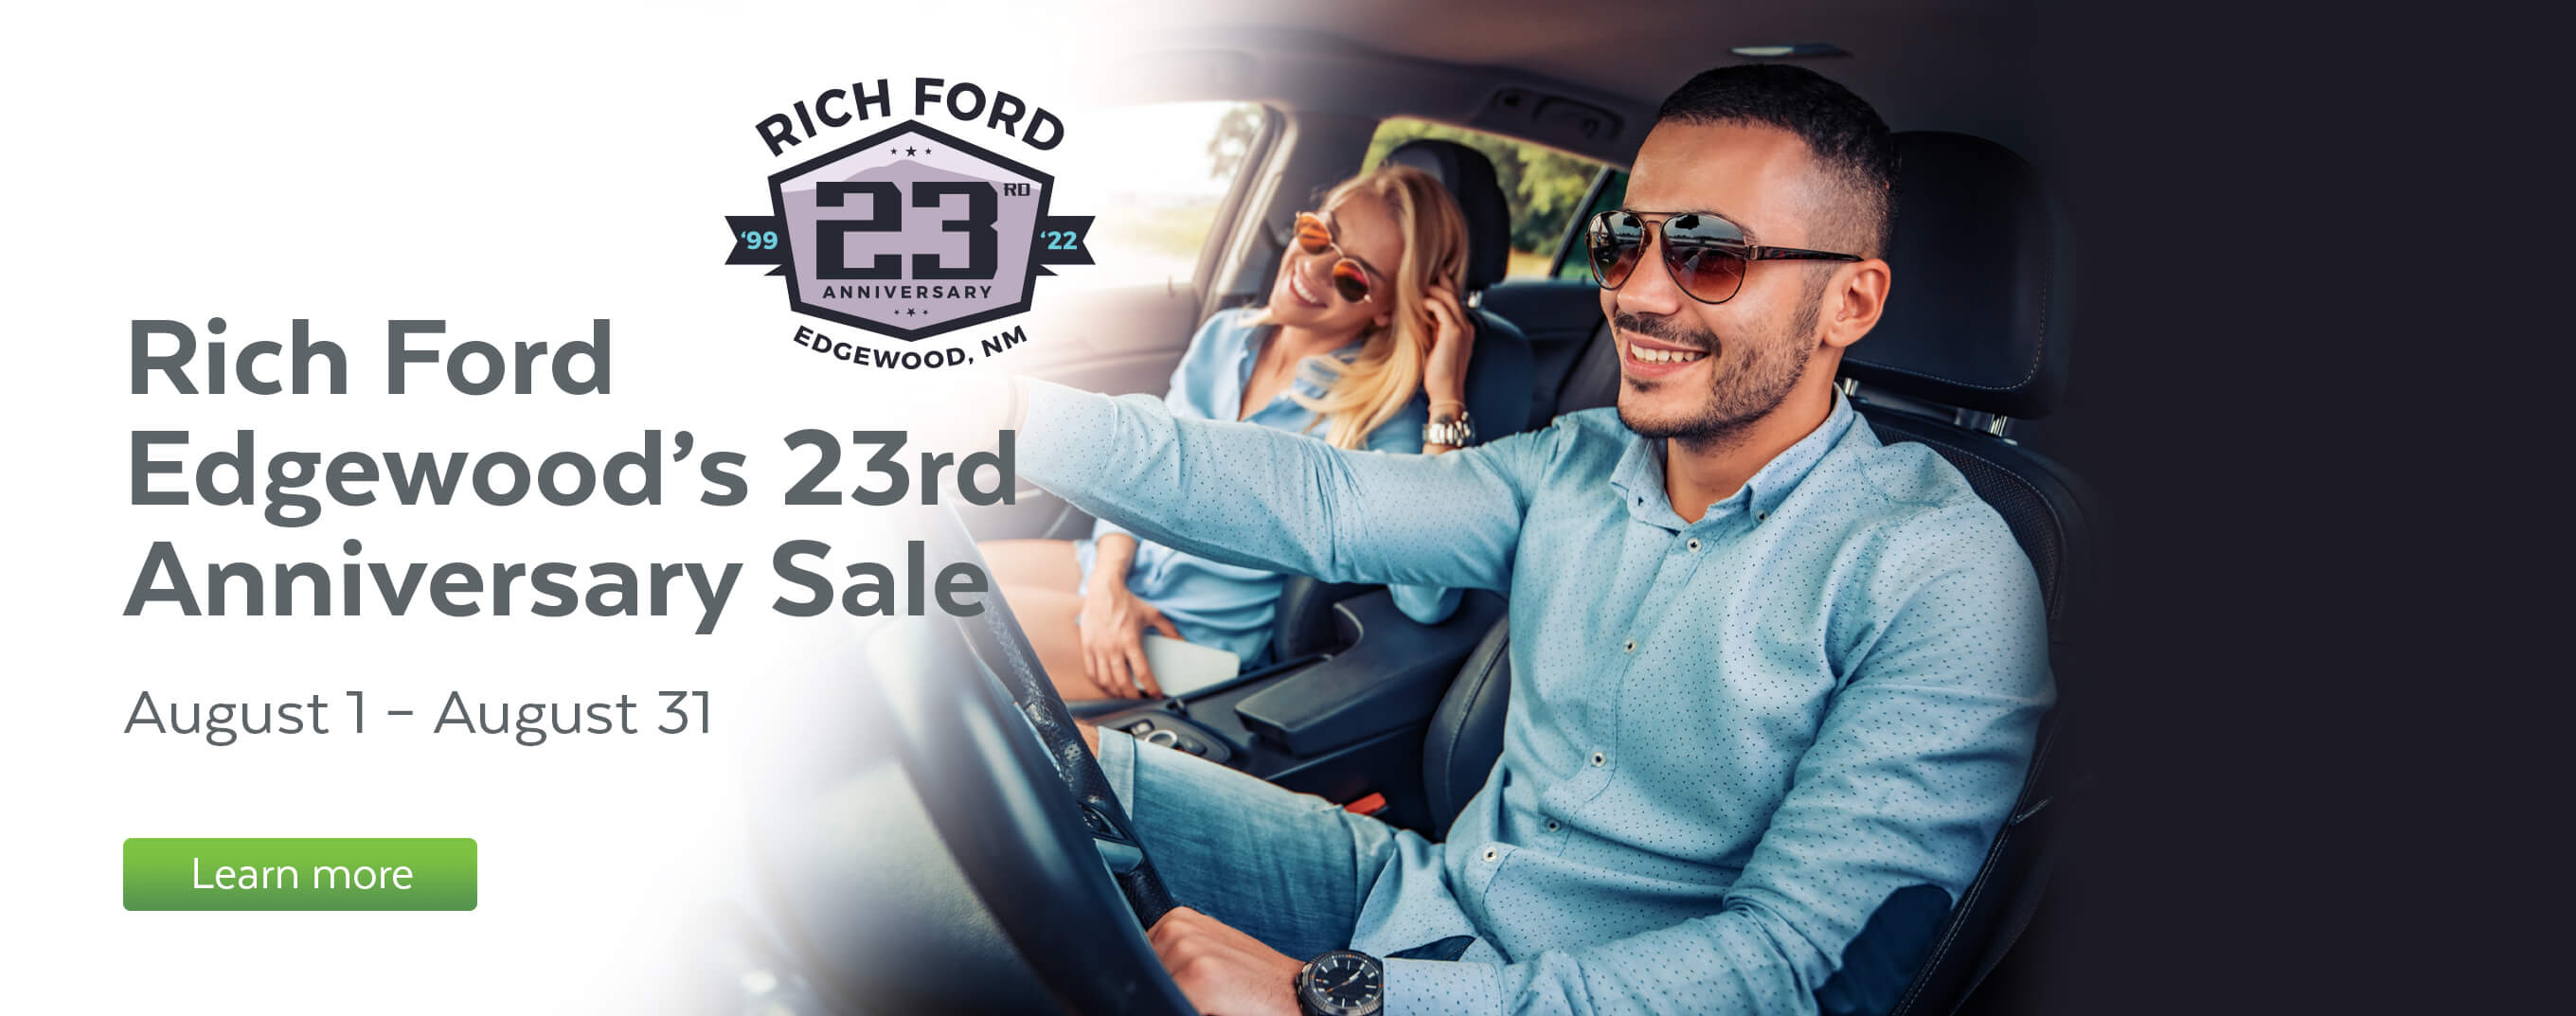 Rich Ford Edgewood's 23rd Anniversary Sale - Aug. 1 -31. Learn More.